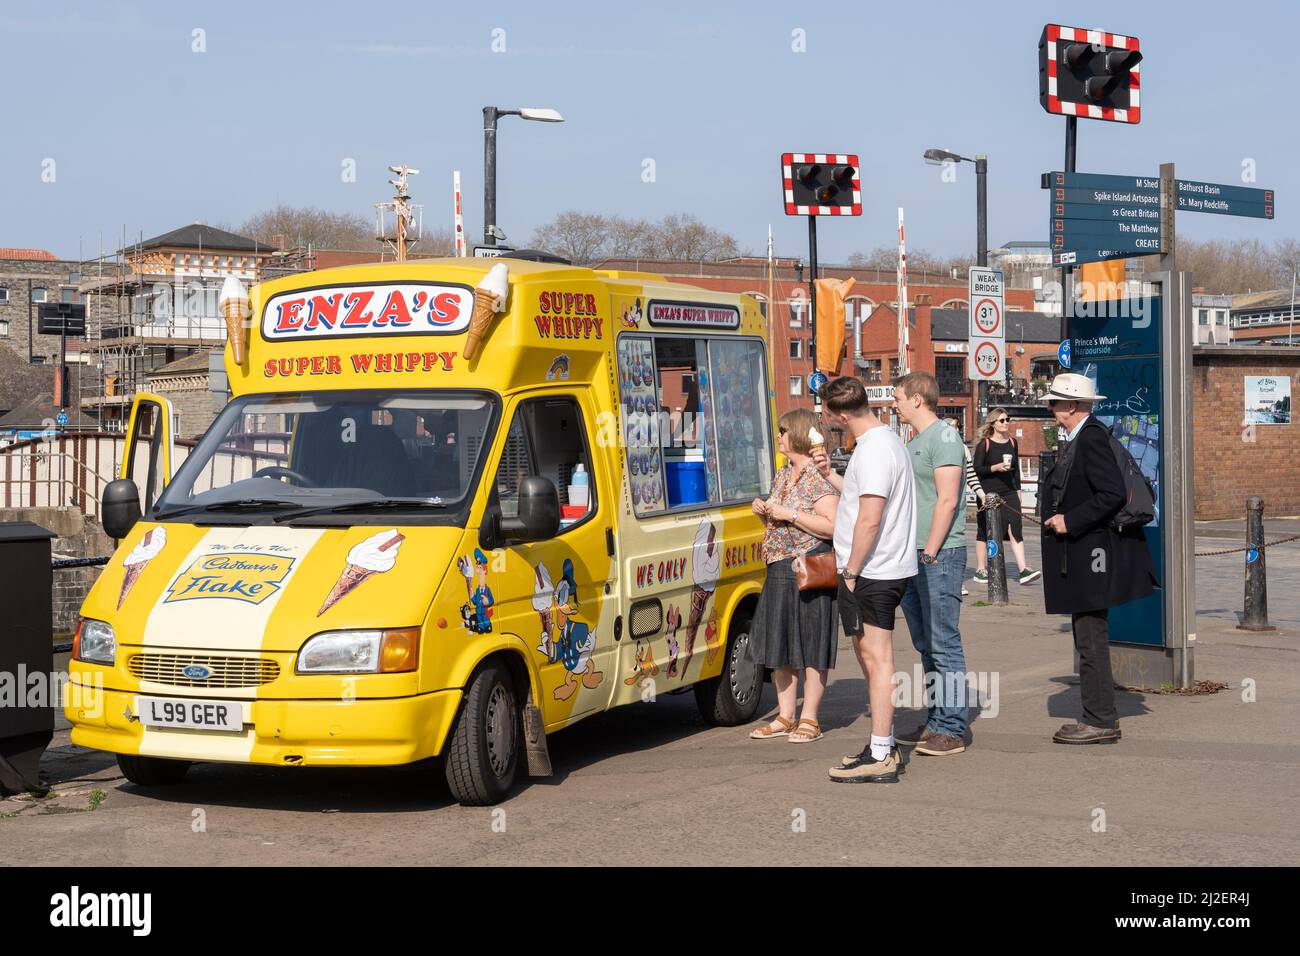 People queue at a van for ice cream on a sunny day at the harbour. Bristol, UK. Credit: Hazel Plater/Alamy Stock Photo